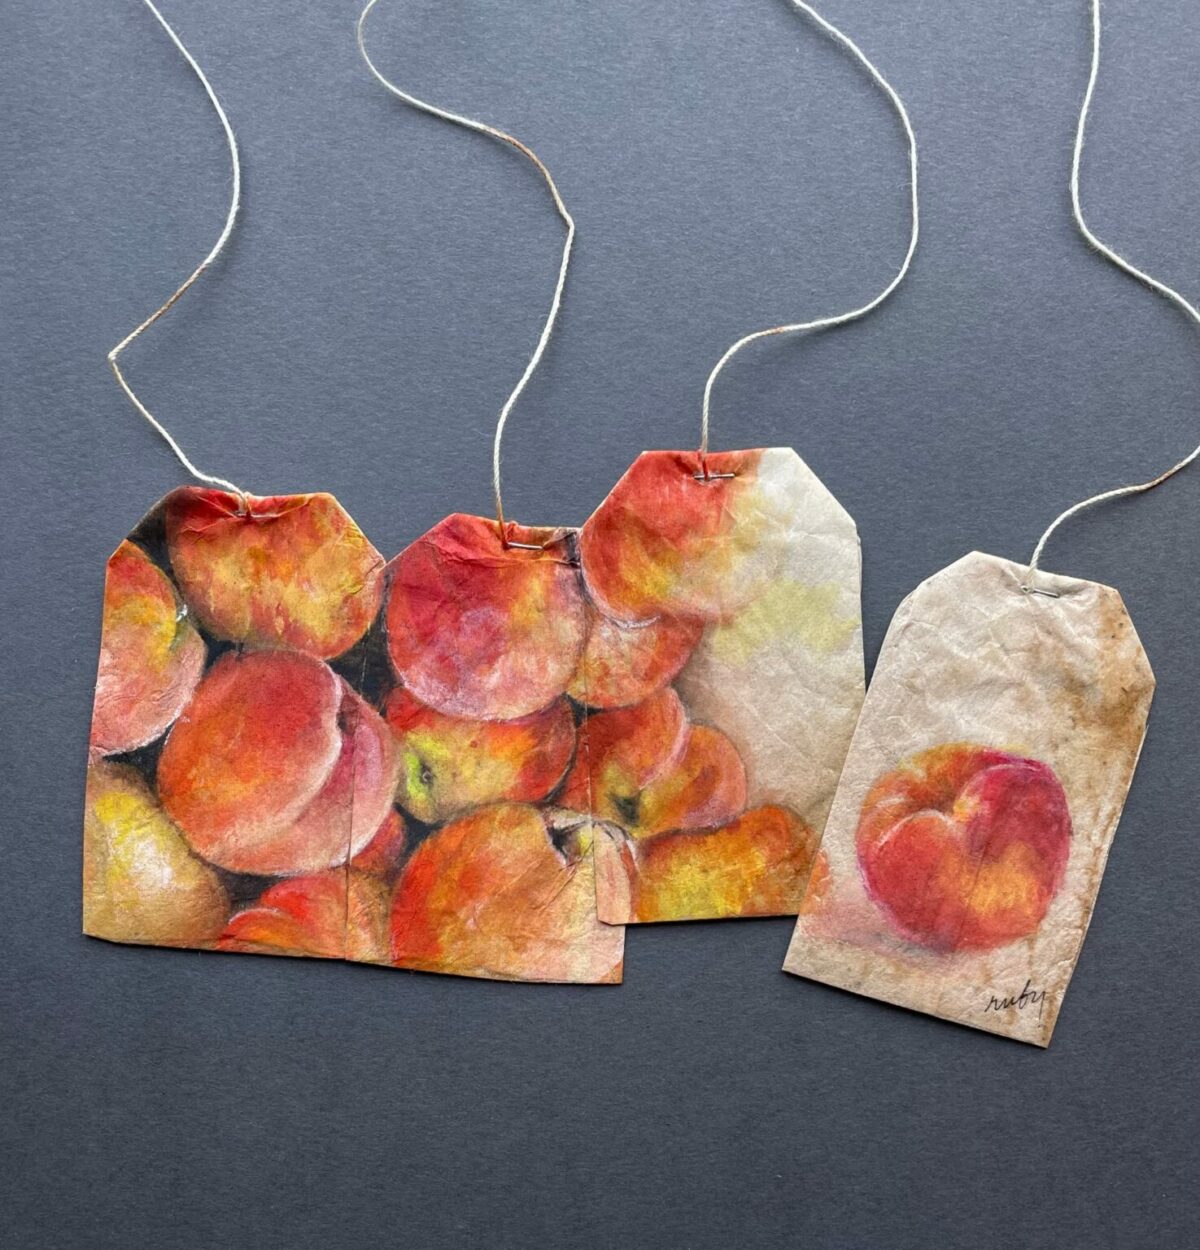 Gorgeous Miniature Watercolors Painted On Used Teabags By Ruby Silvious 17